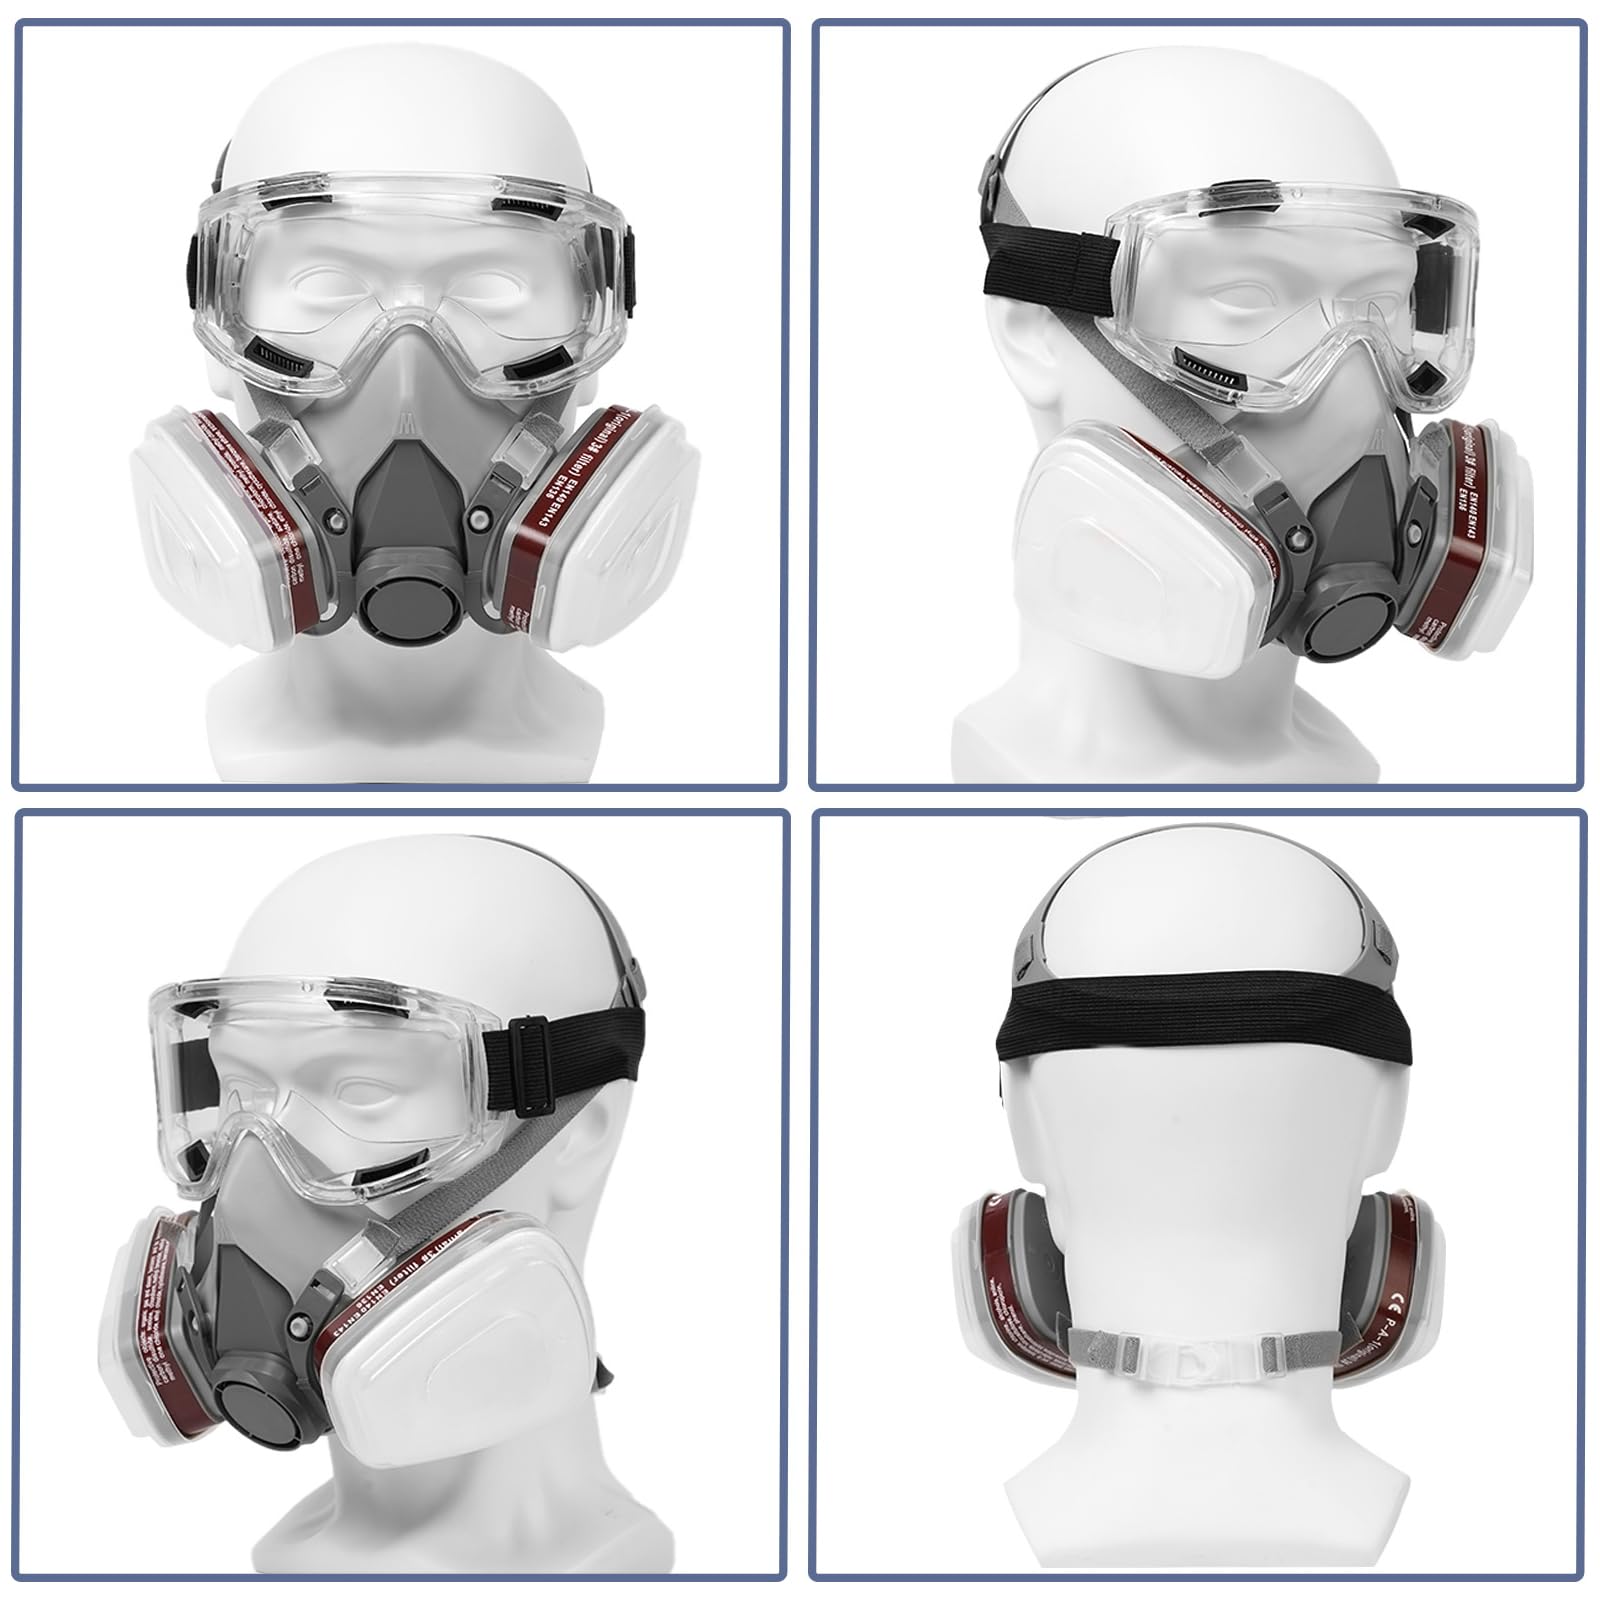 Respirator Mask with Filters, Reusable Half Face Gas Mask with Safety Glasses, Half Face Paint Mask, for Painting, Welding, Woodworking, Polishing, Organic Vapors, Sanding and Other Work Protection.